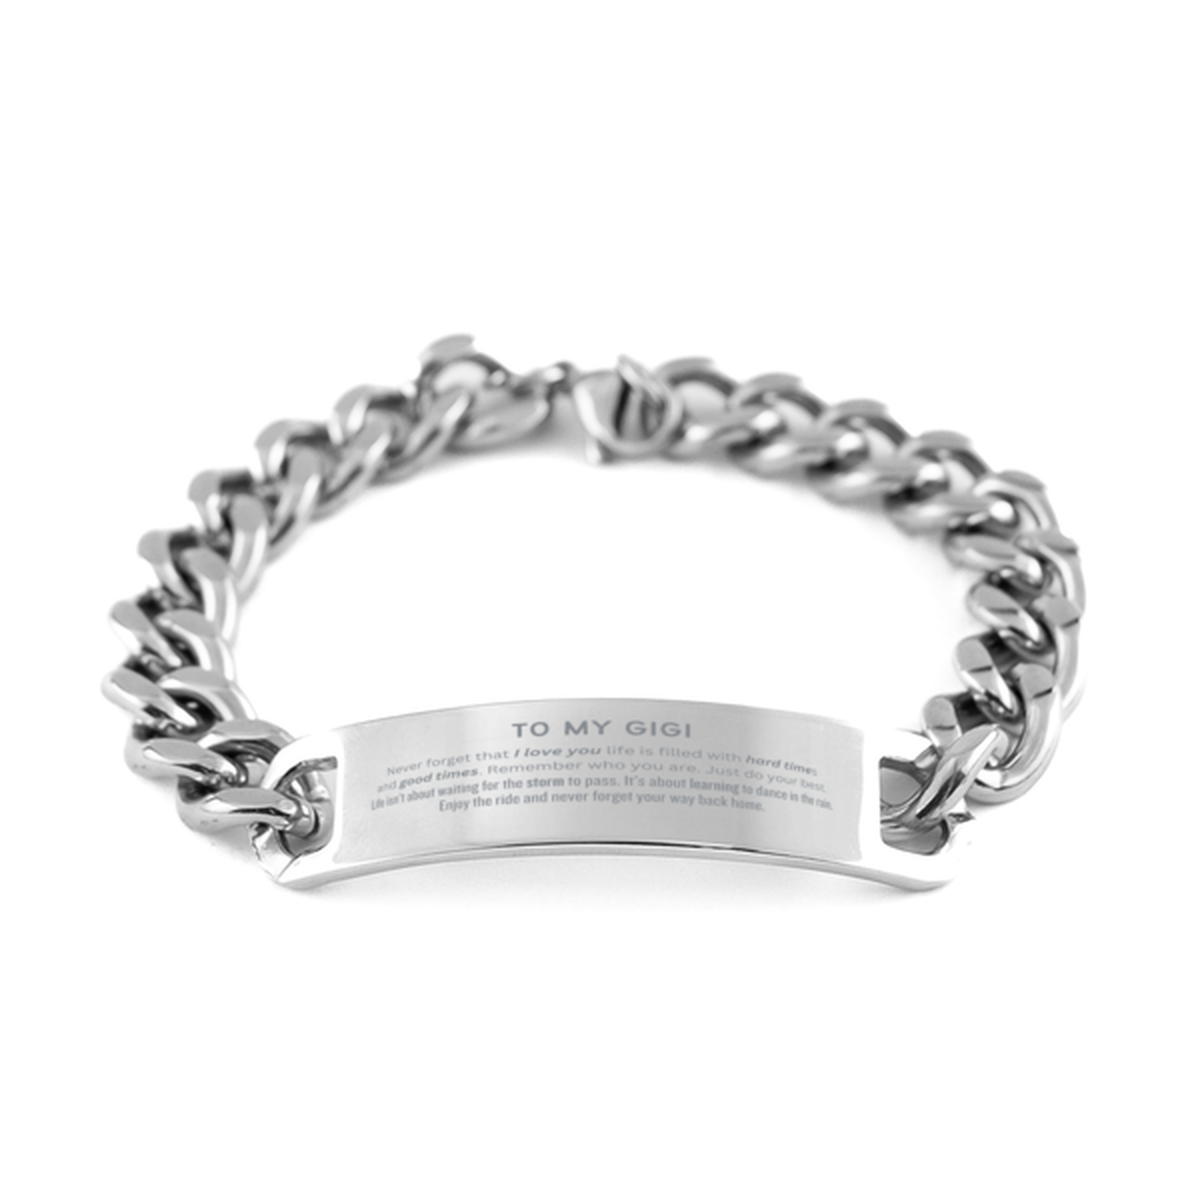 Christmas Gigi Cuban Chain Stainless Steel Bracelet Gifts, To My Gigi Birthday Thank You Gifts For Gigi, Graduation Unique Gifts For Gigi To My Gigi Never forget that I love you life is filled with hard times and good times. Remember who you are. Just do